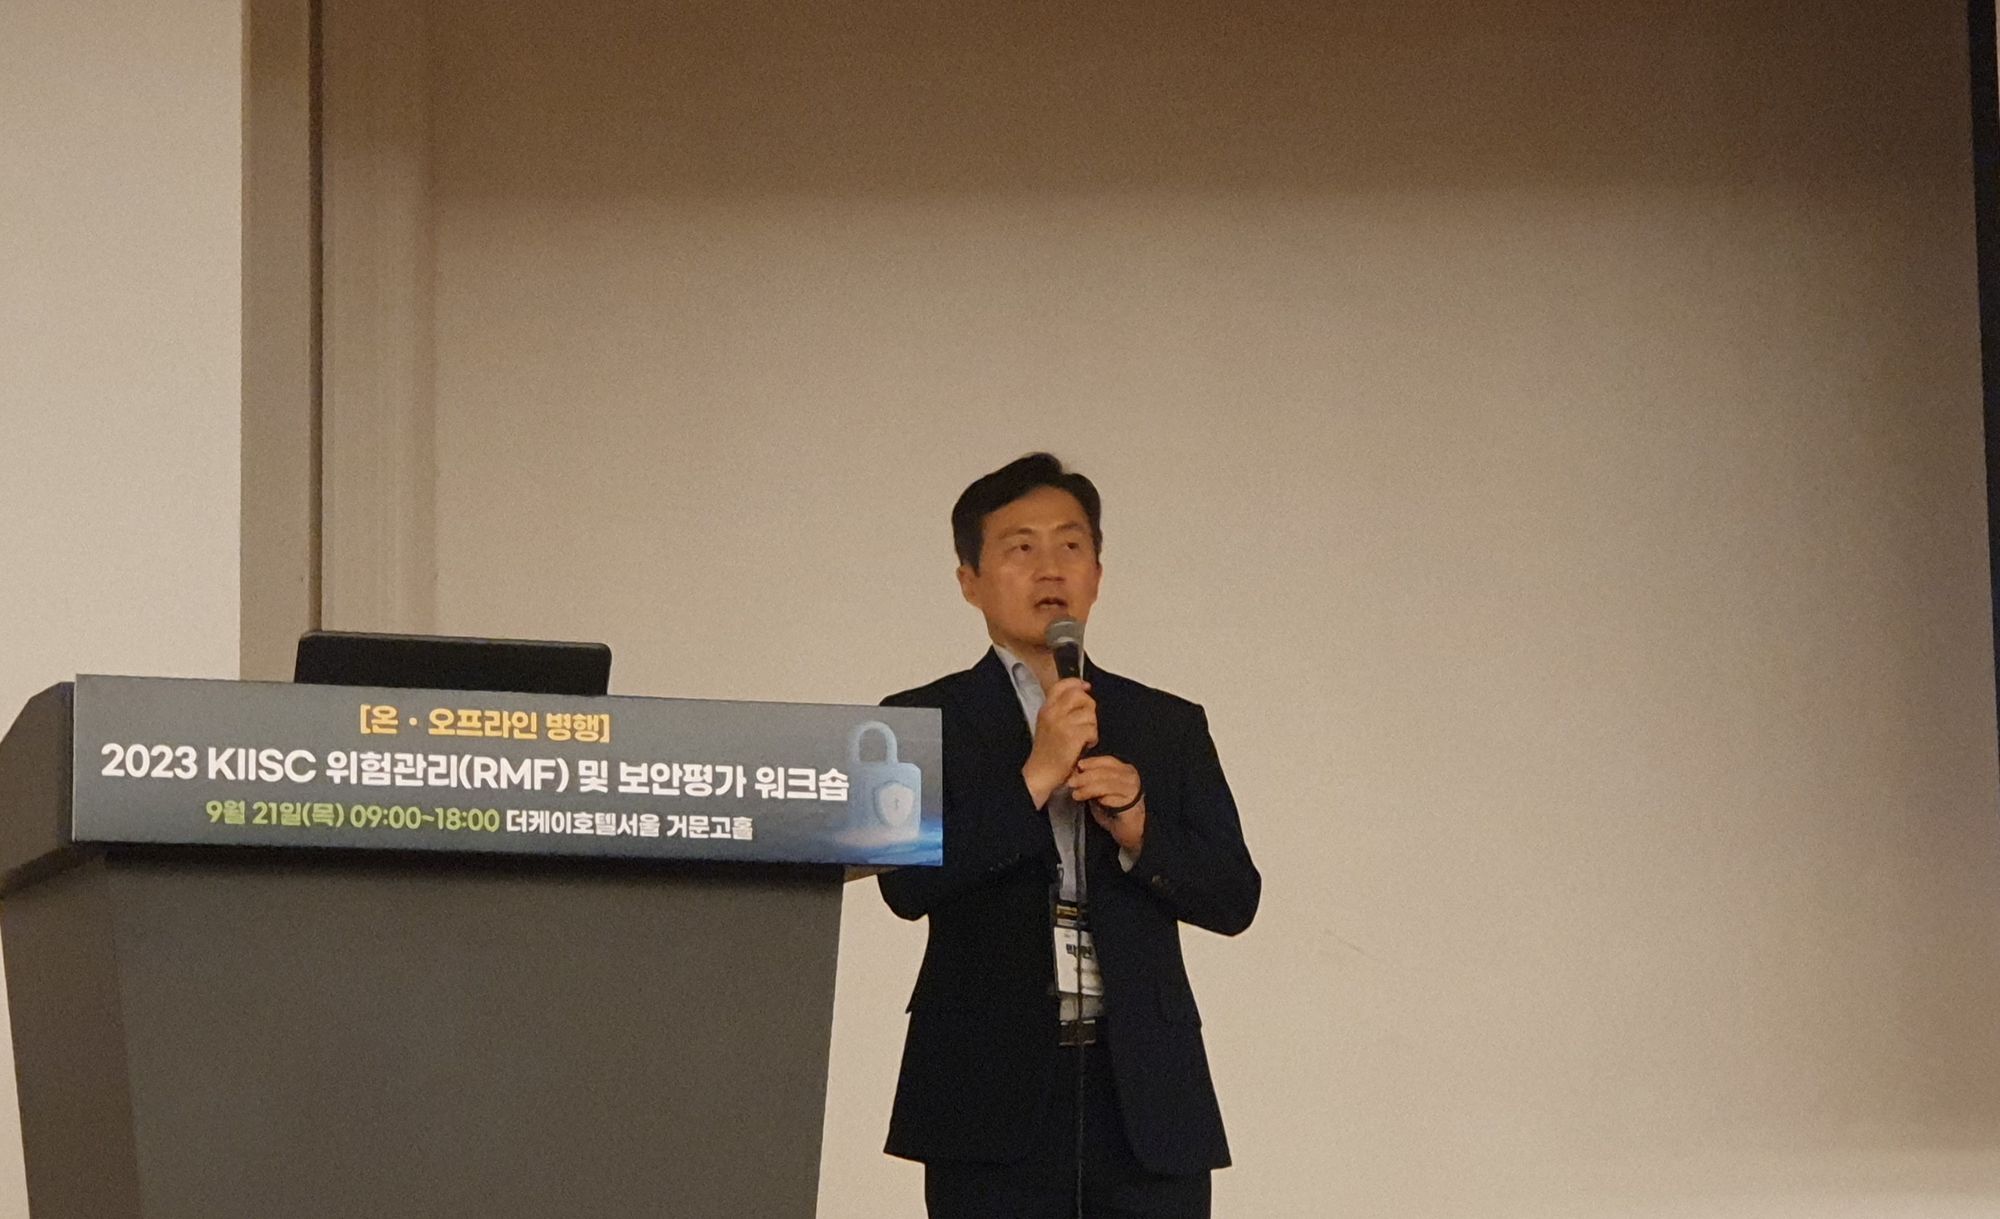 0921 - South Korean military official stresses need for managing cyber risks in weaponry